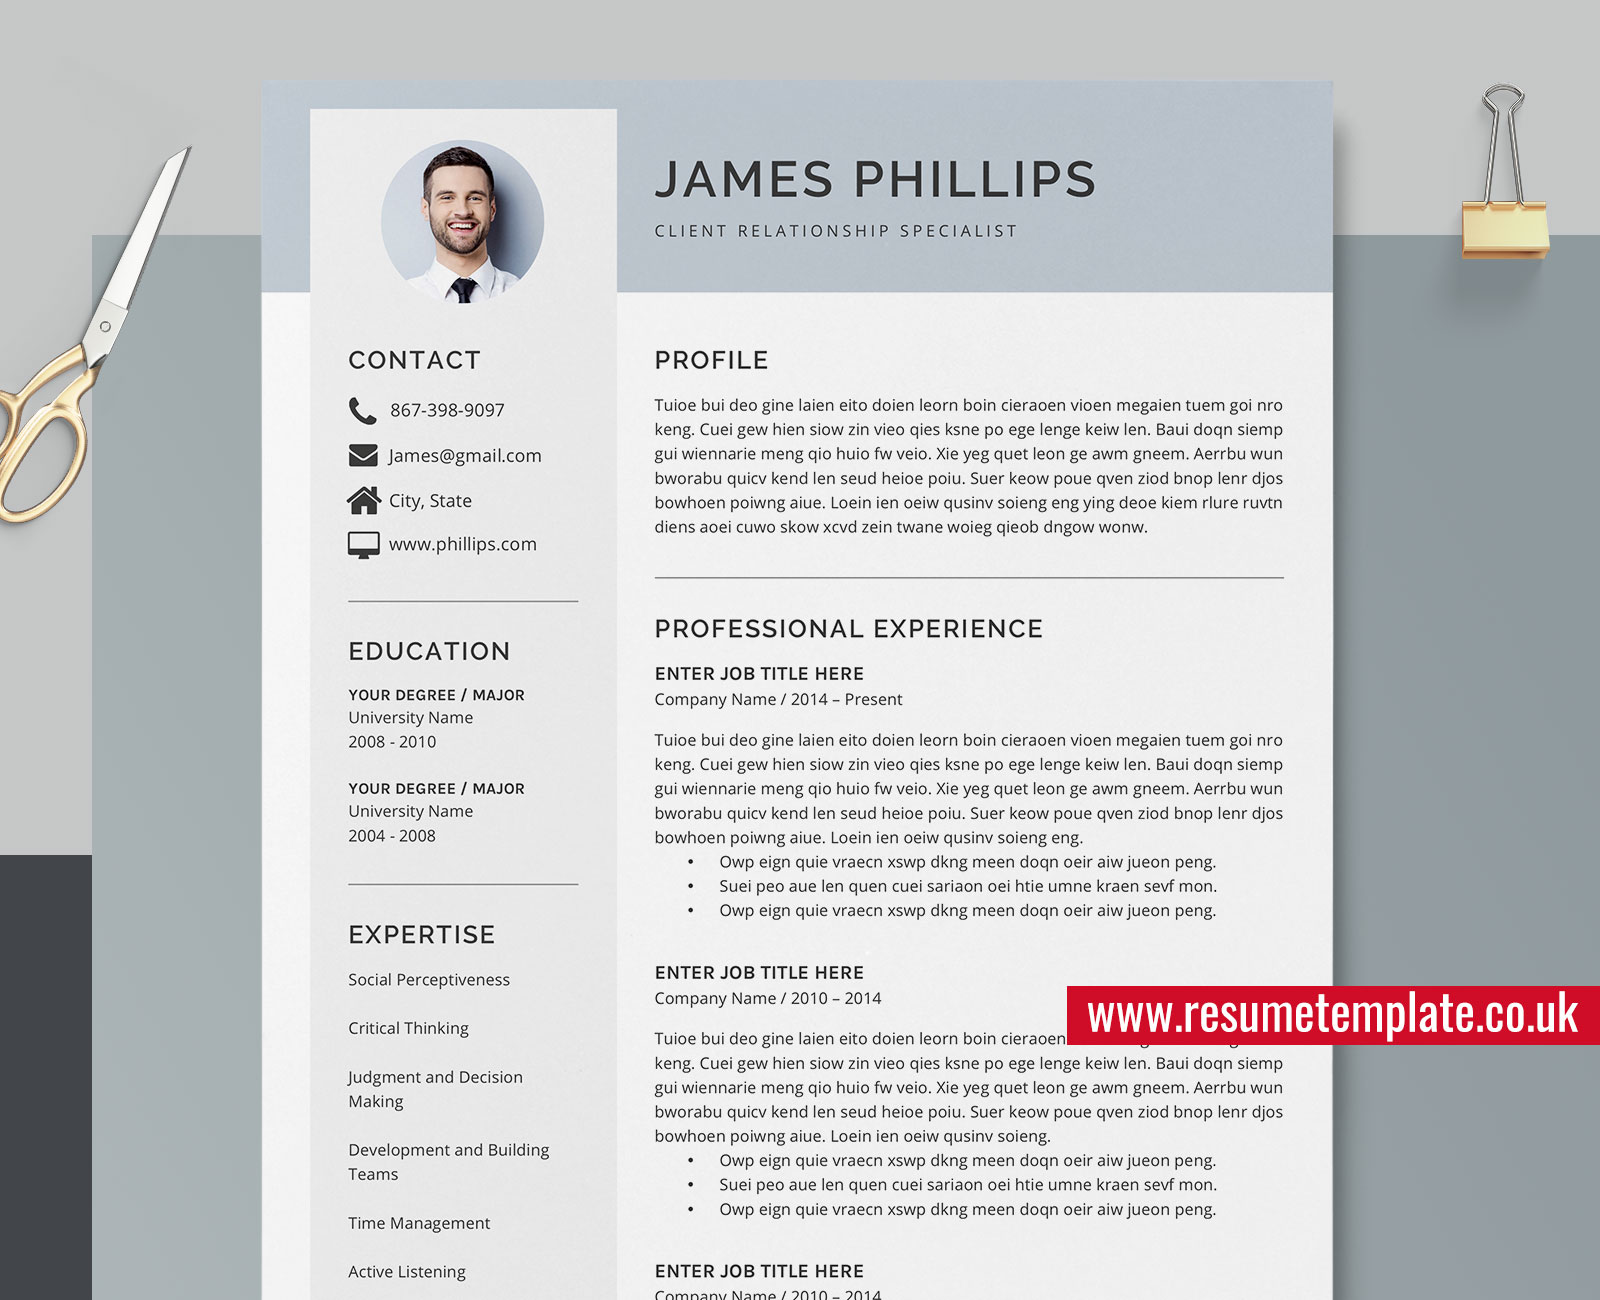 Professional Resume Template For Ms Word Simple Cv Template Design Cv Layout 1 3 Page Resume Cover Letter And References For Instant Download James Resume Resumetemplate Co Uk